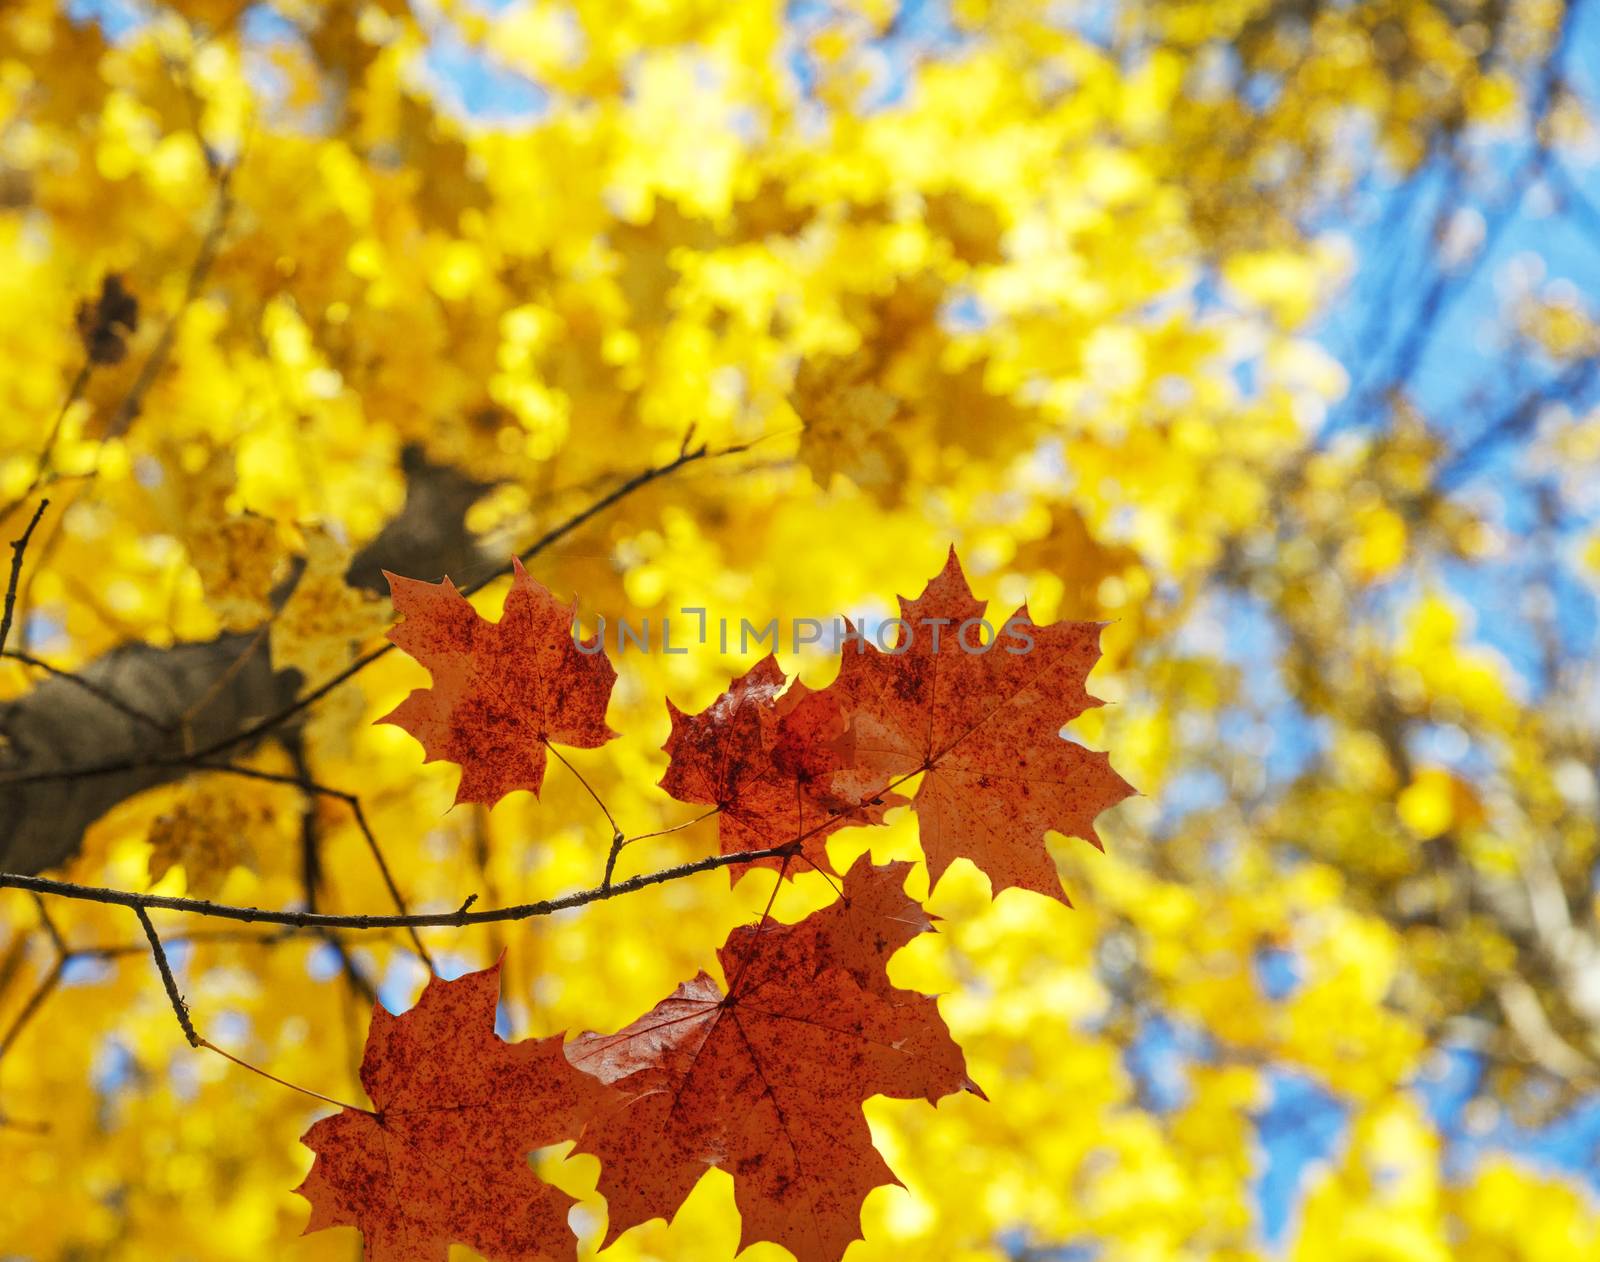 Red and yellow leaves on maple tree in October